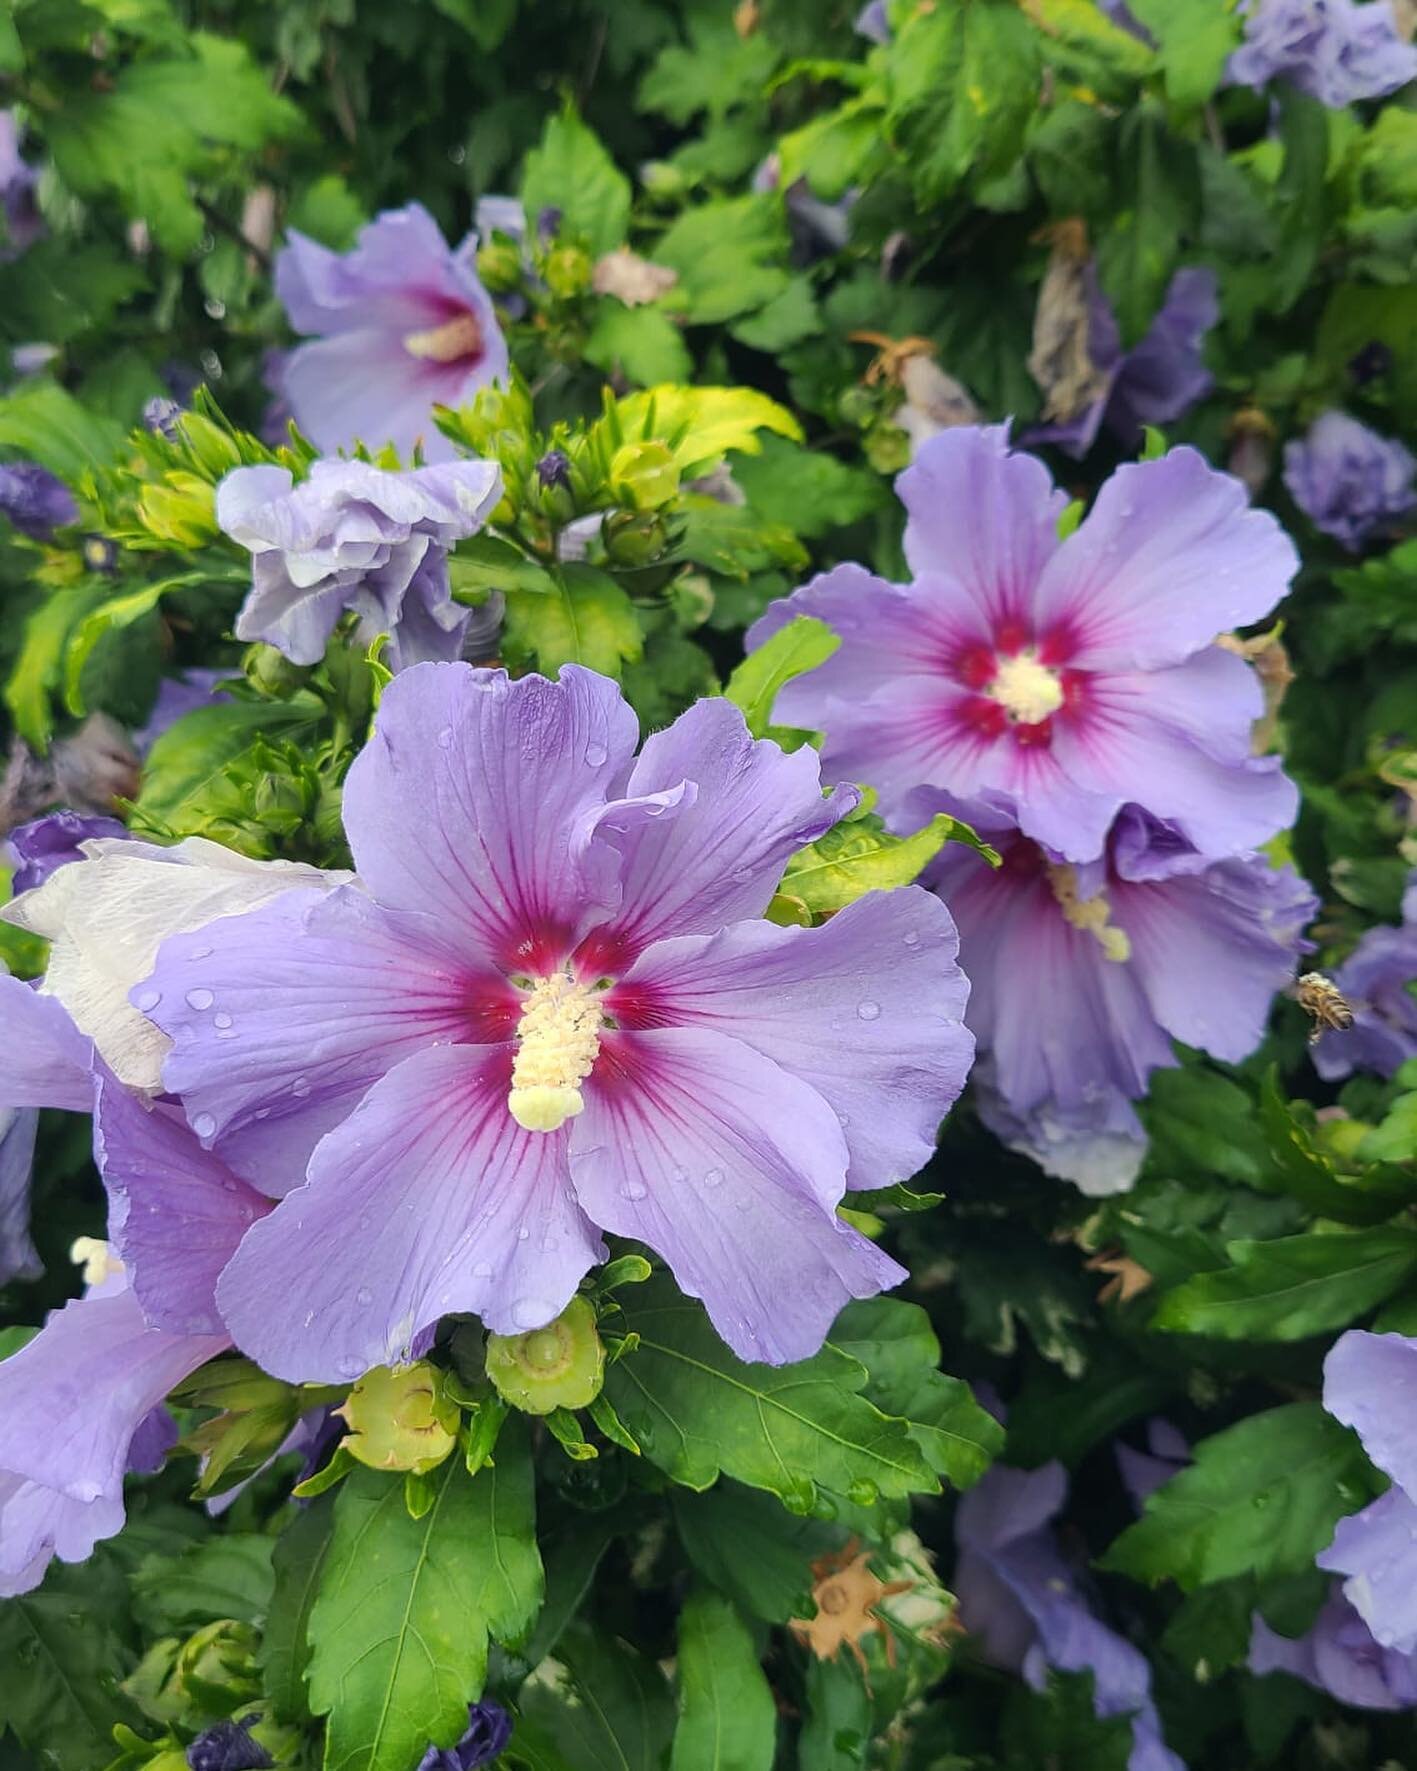 Don&rsquo;t forget to stop and smell the flowers. #gardens #gardenlife #flowers #flowersofinstagram #plants #landscaping #gardendesign #roseofsharon #purple #northshore